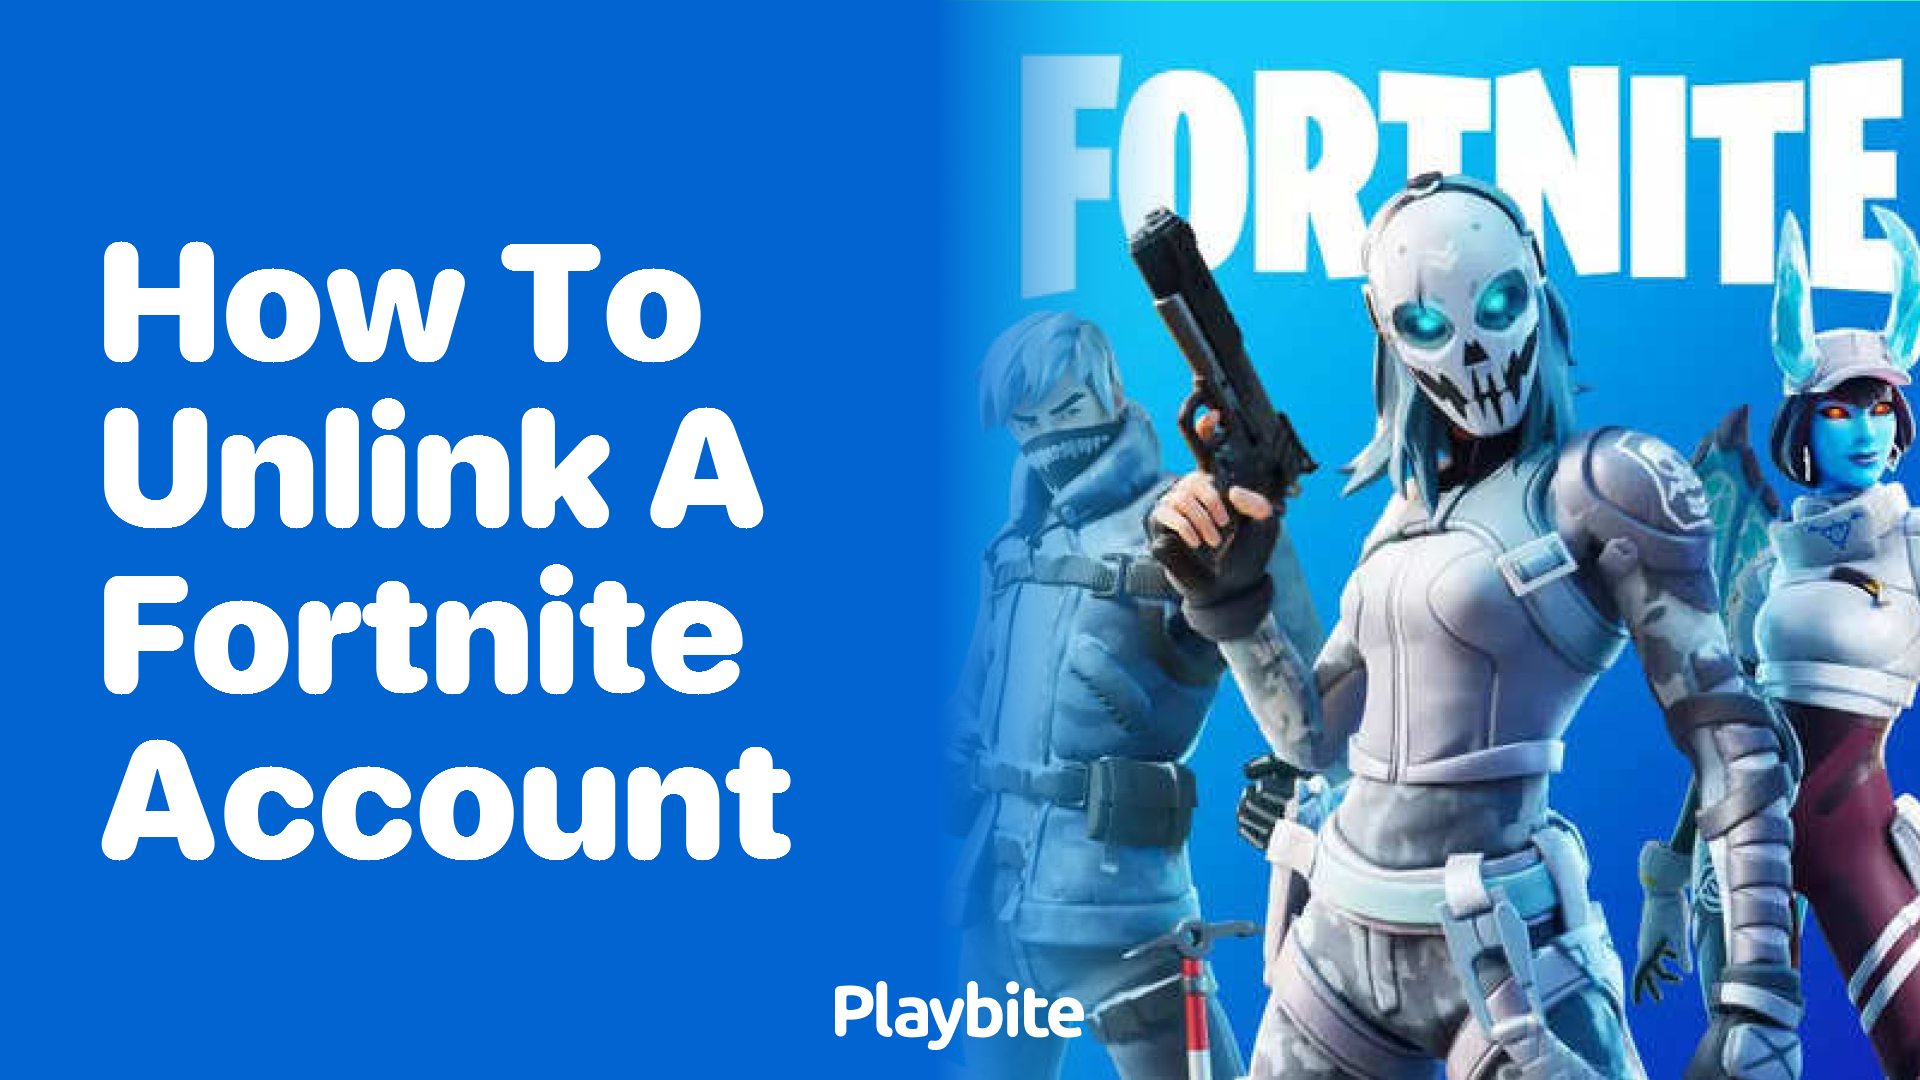 How to Unlink a Fortnite Account: A Quick Guide